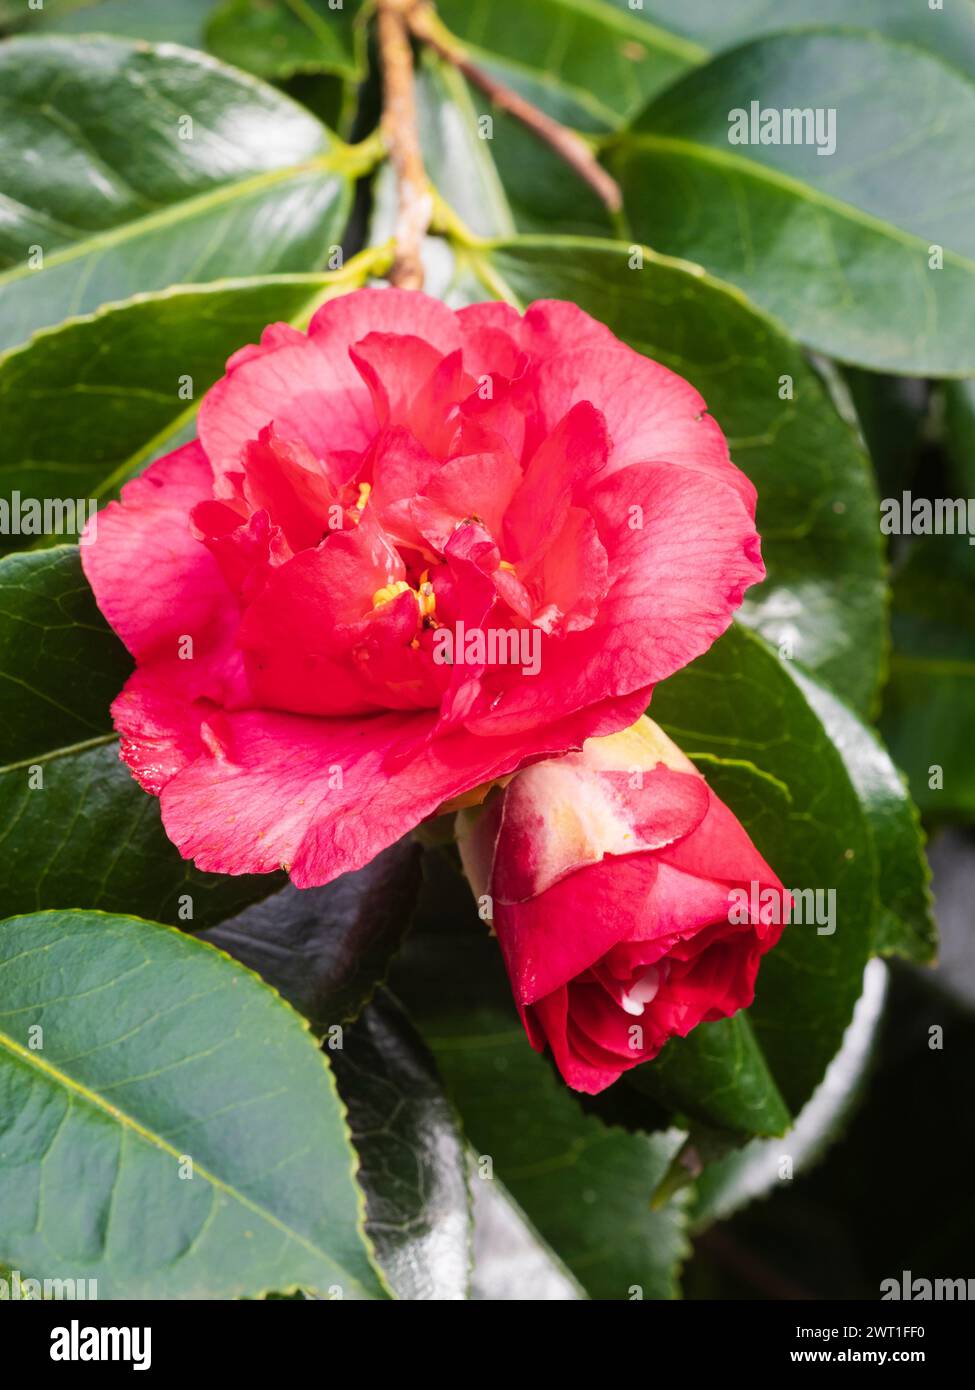 Late winter to early spring flower of the hardy evergreen shrub, Camellia japonica 'Elegans' Stock Photo